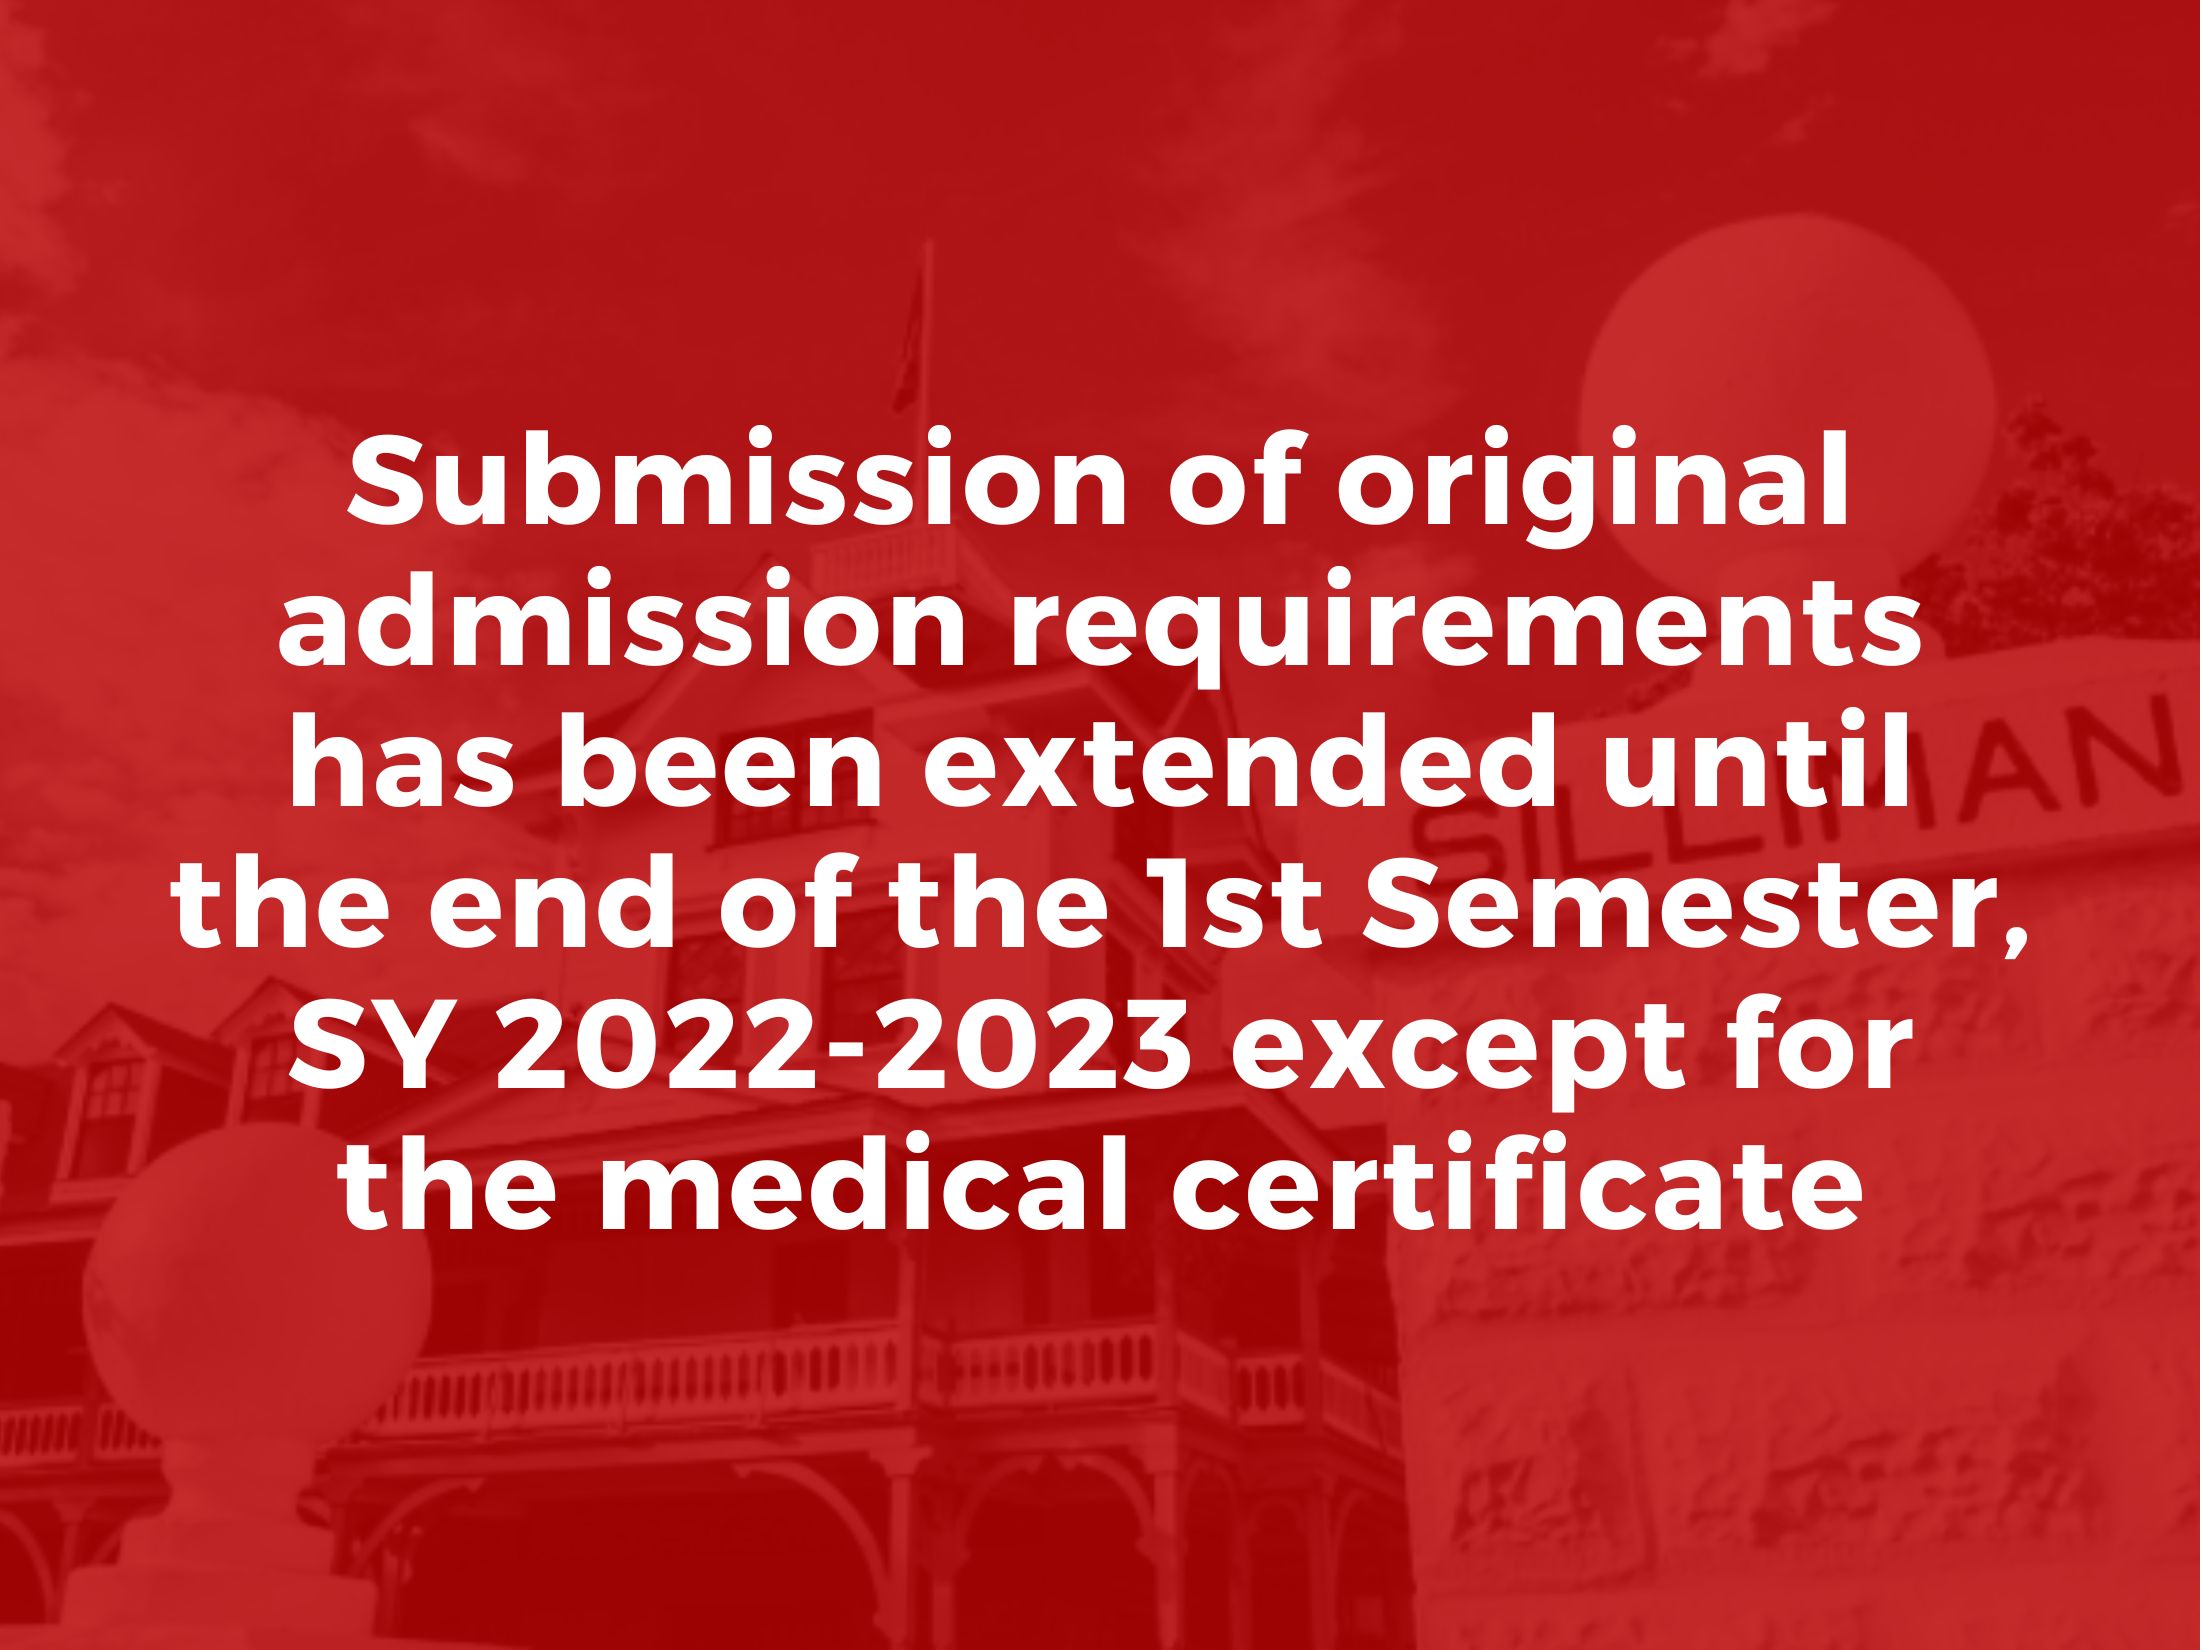 Announcement: Submission of original admission requirements has been extended until the end of the 1st Semester, SY 2022-2023 except for the medical certificate.